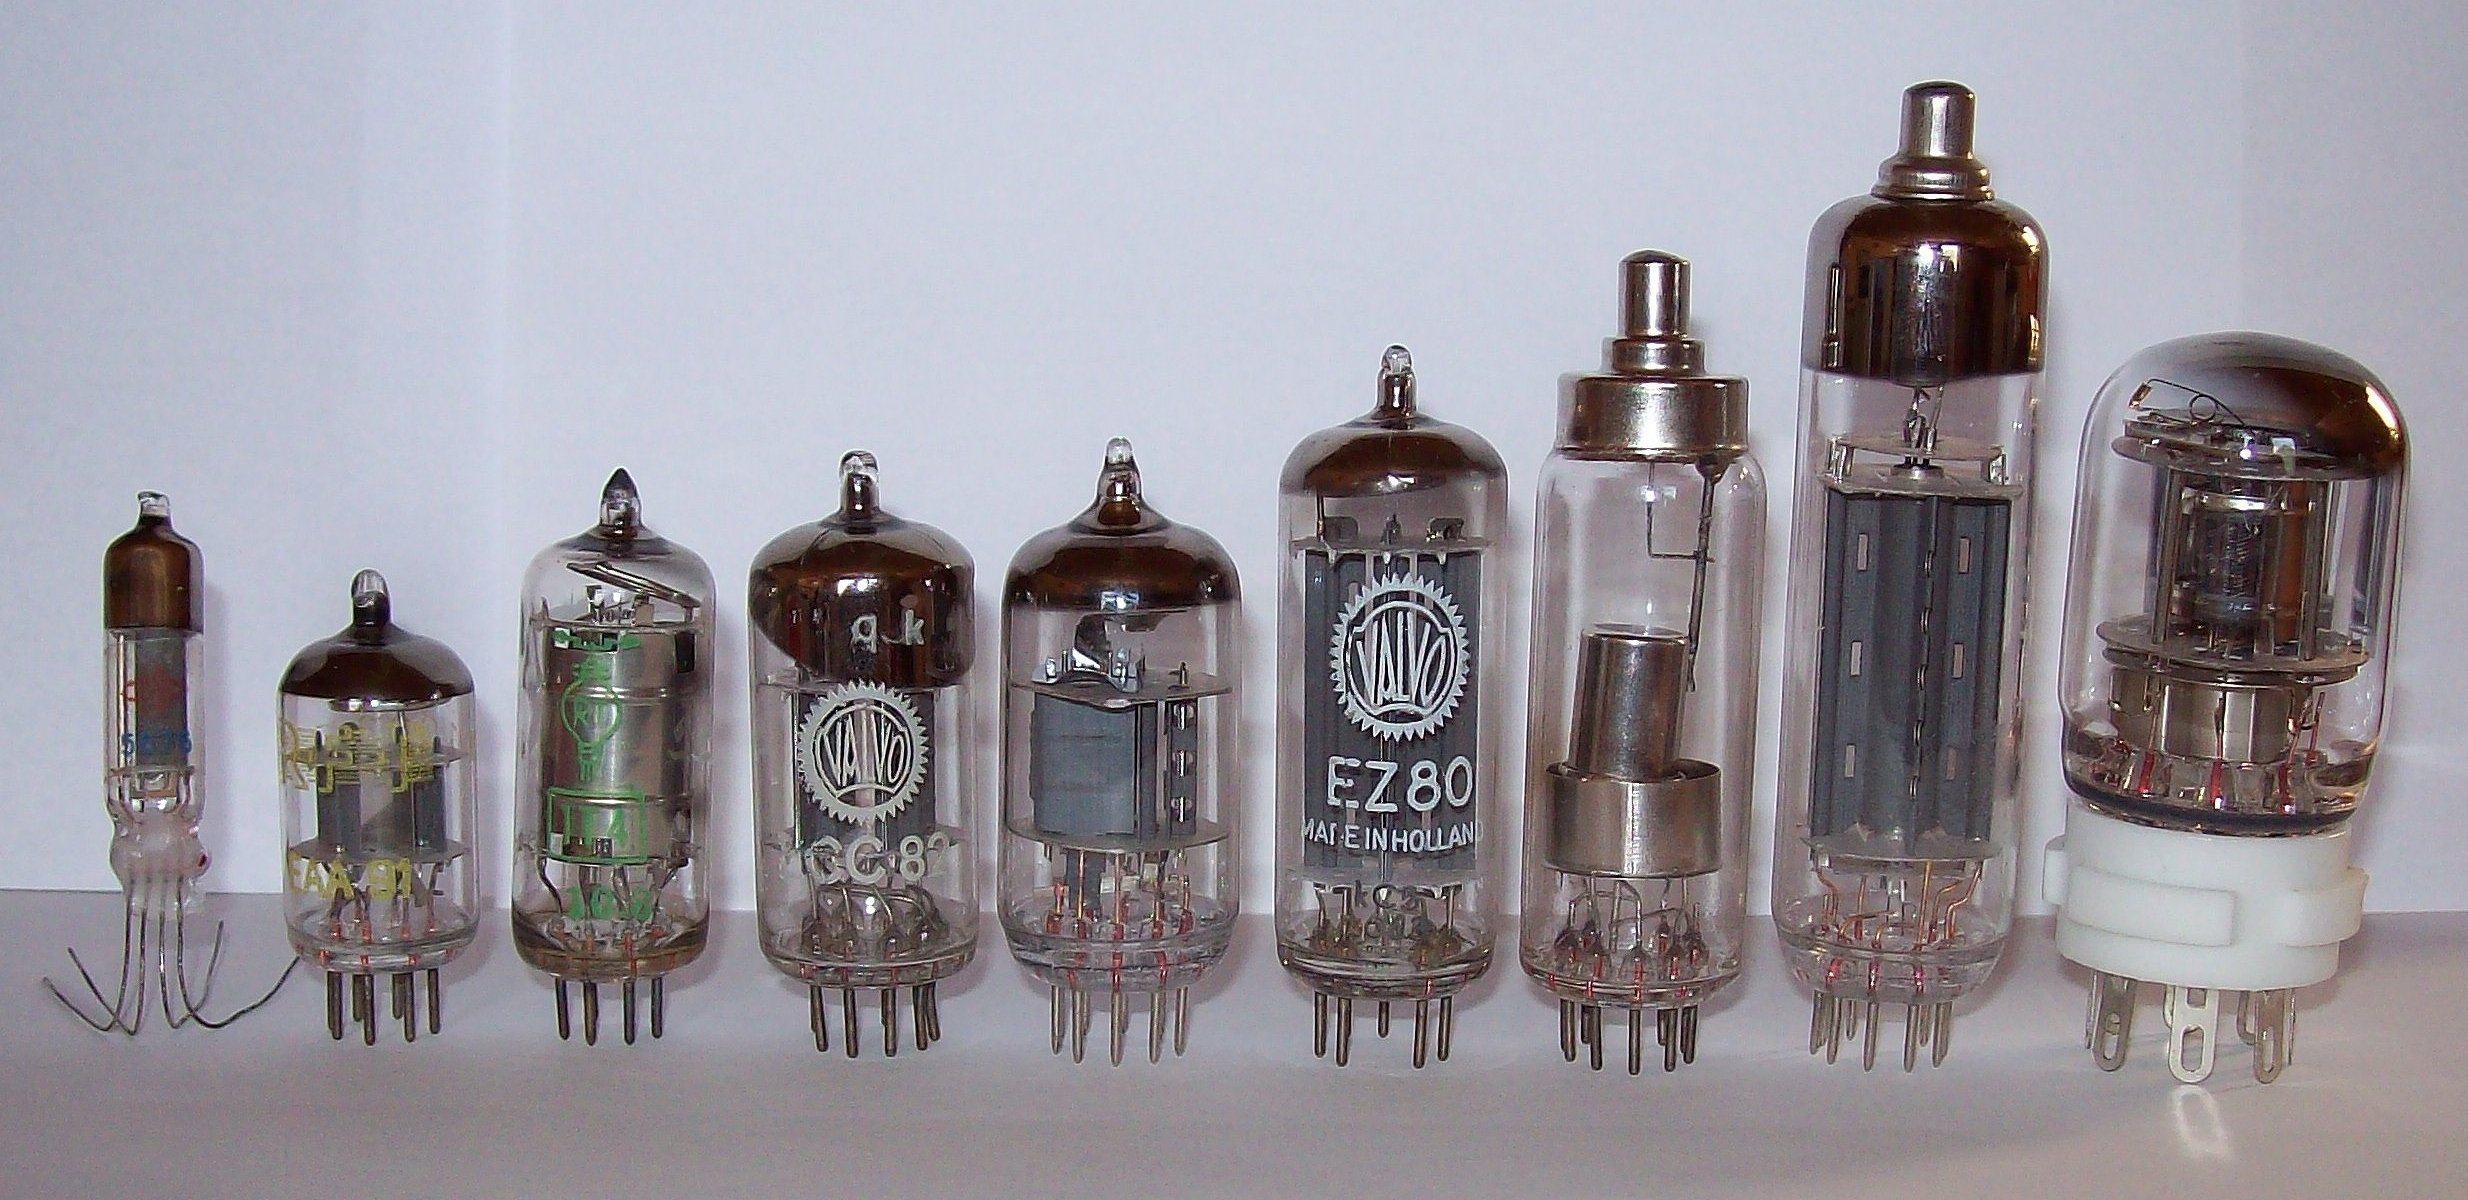 TESTED DUAL 2 section VARIABLE air tuning capacitor vacuum tube AM radio NOS cap